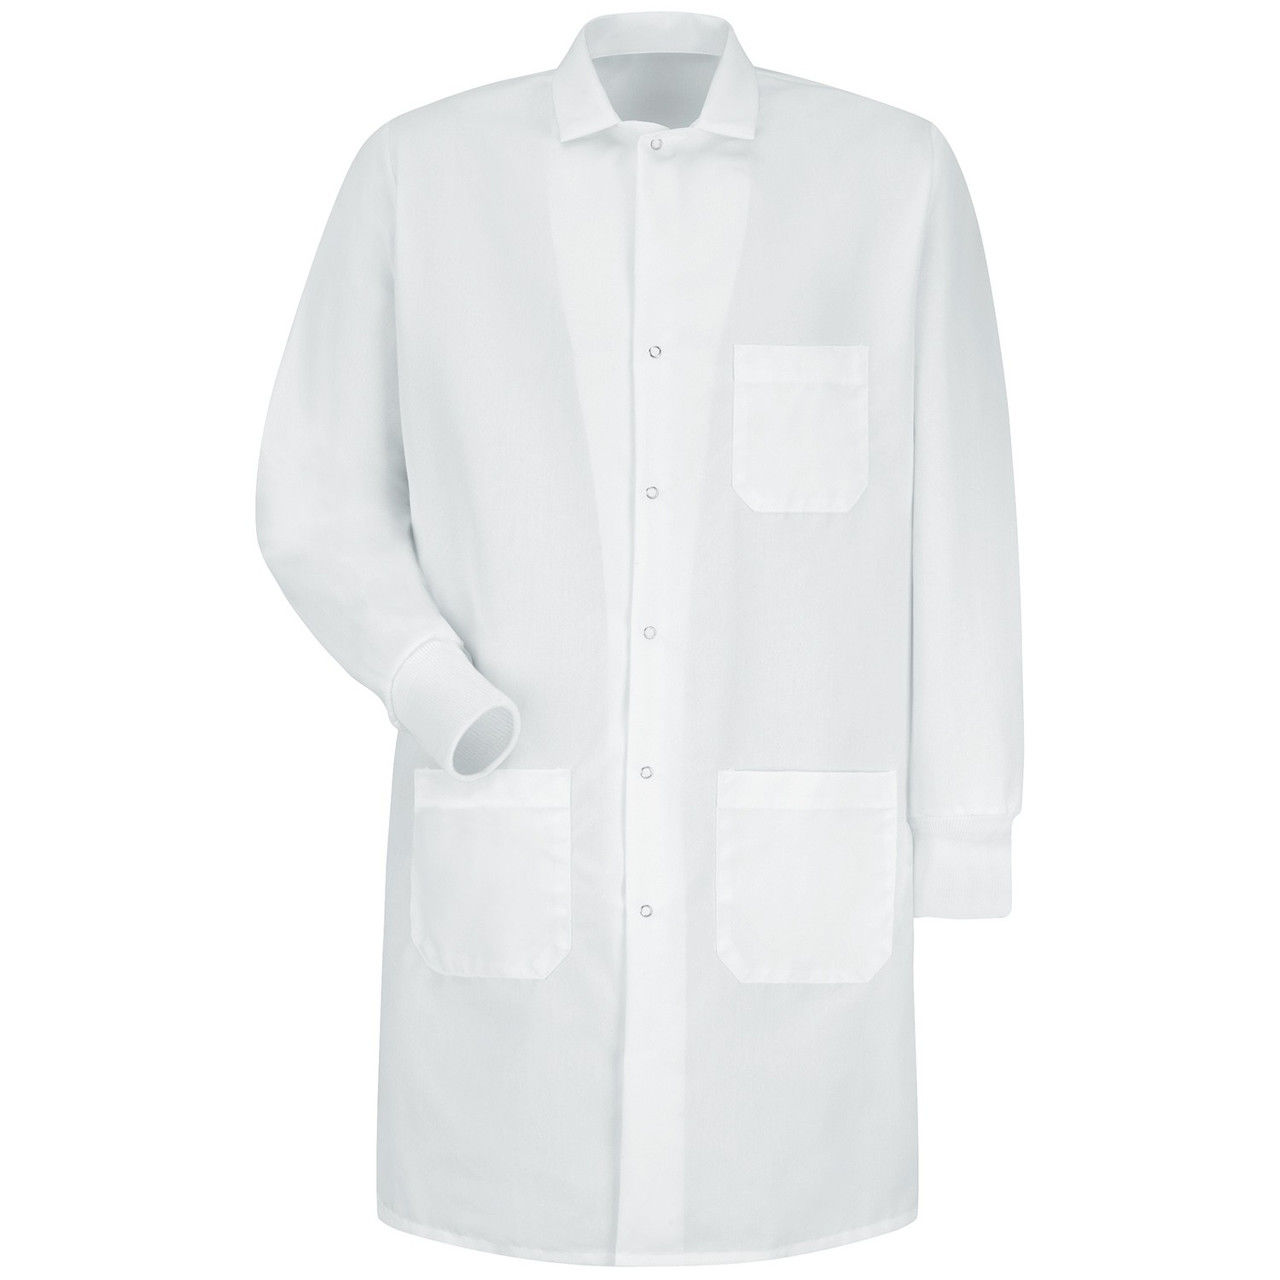 What is the main purpose of a laboratory coat?